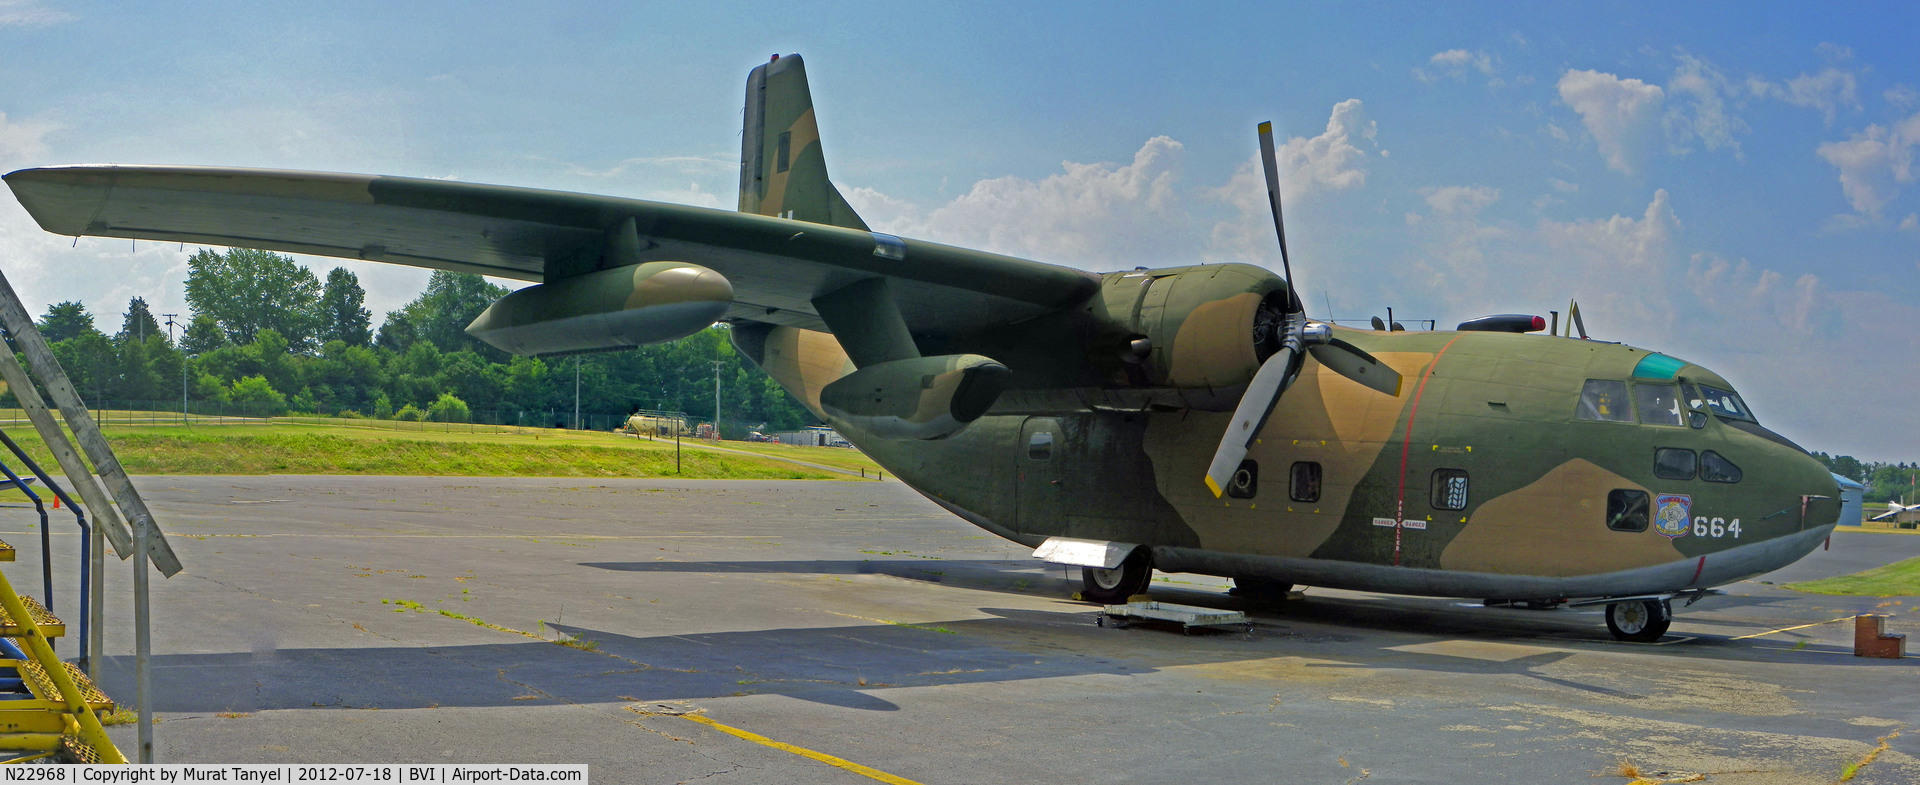 N22968, 1954 Fairchild C-123K Provider C/N 20113, A panoramic view at the Air Heritage Museum